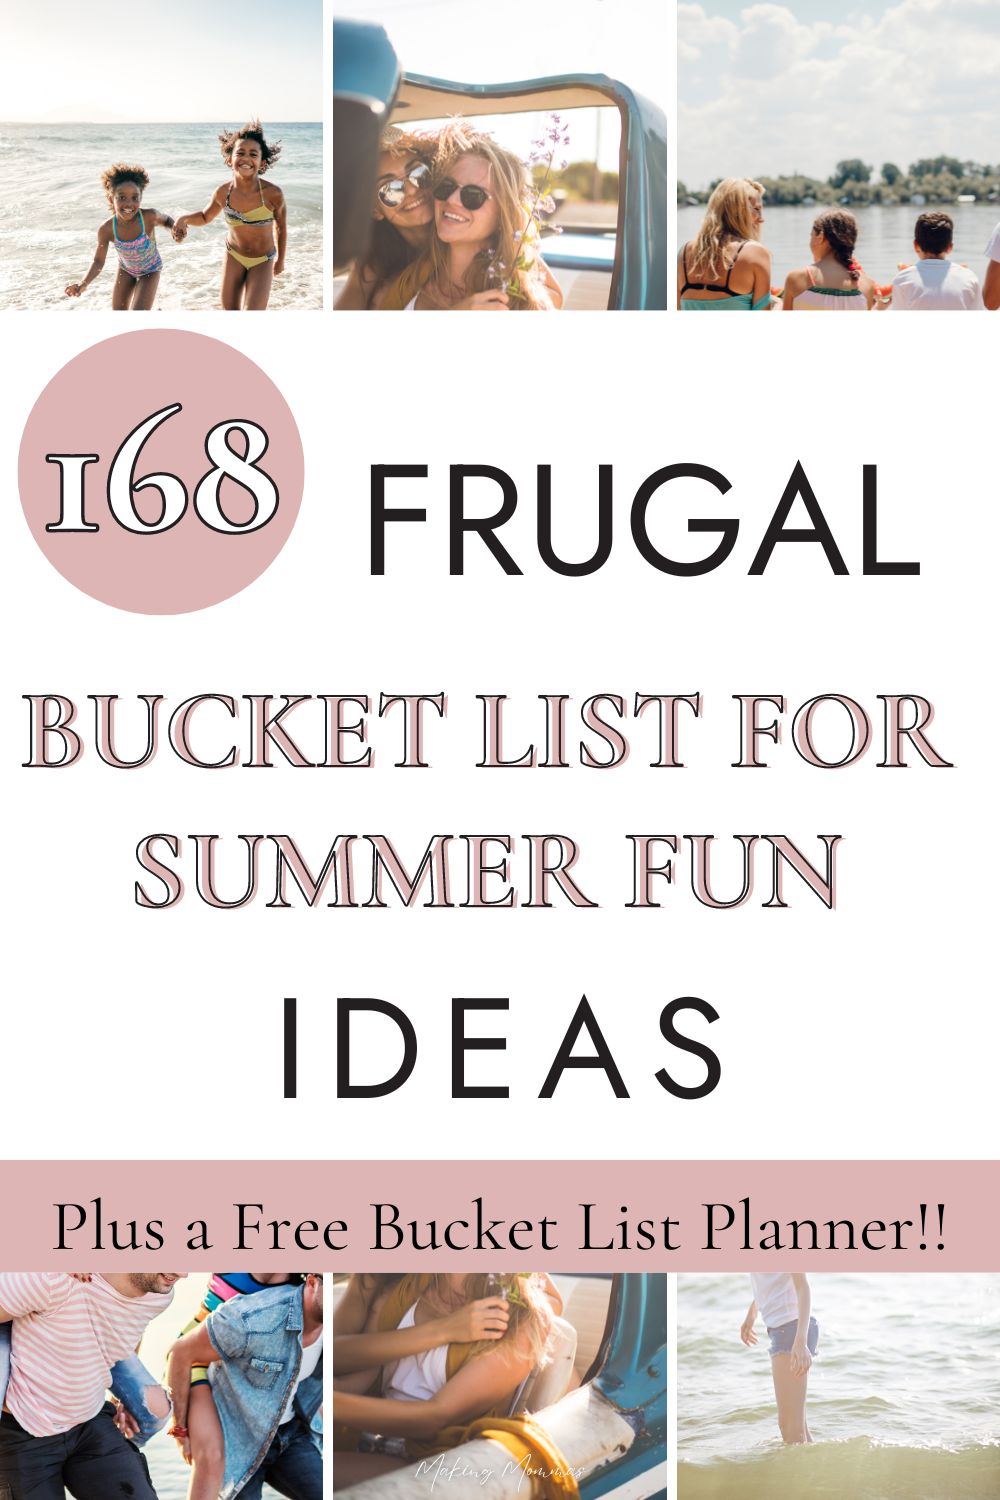 Pin image that reads, "168 frugal bucket list for summer fun ideas, + a free bucket list planner!", with a collage of summer fun pics.